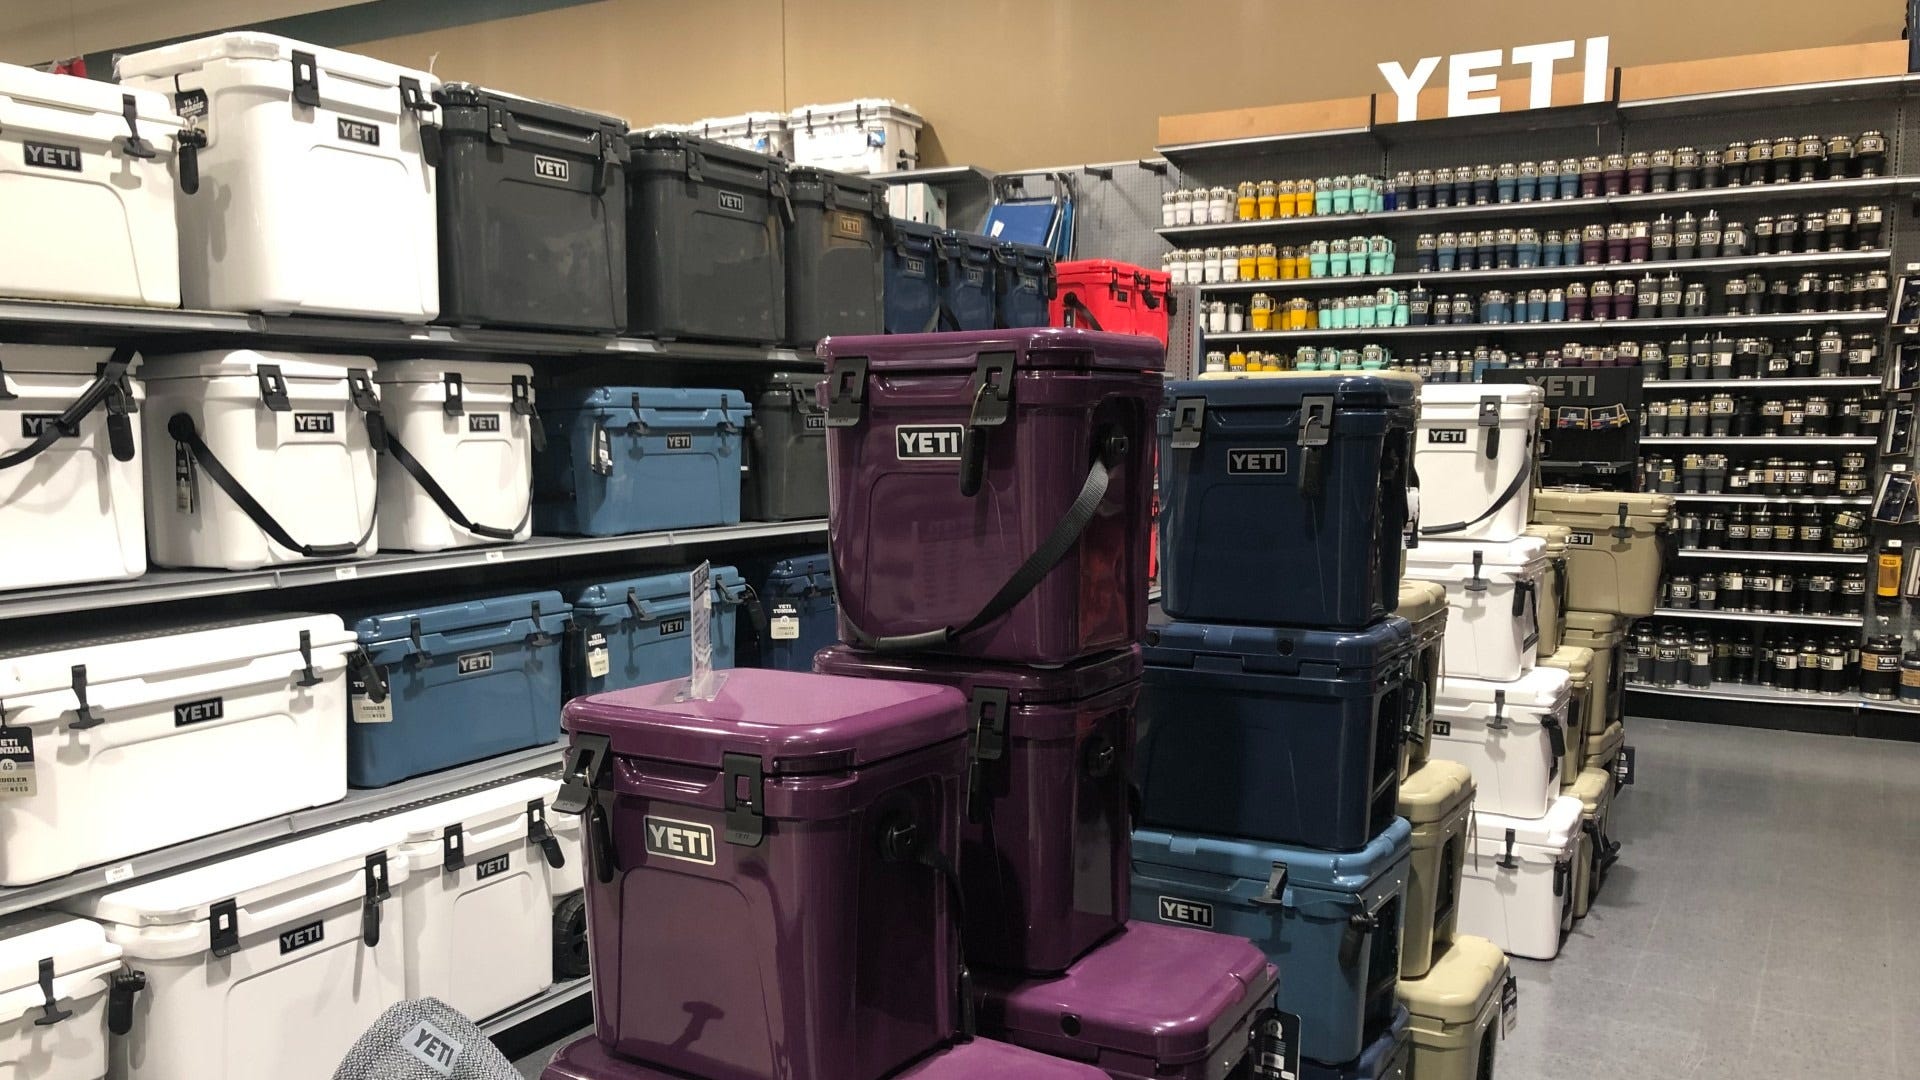 If You Need a New Soft Cooler After the Yeti Recall, Grab This $17 Option